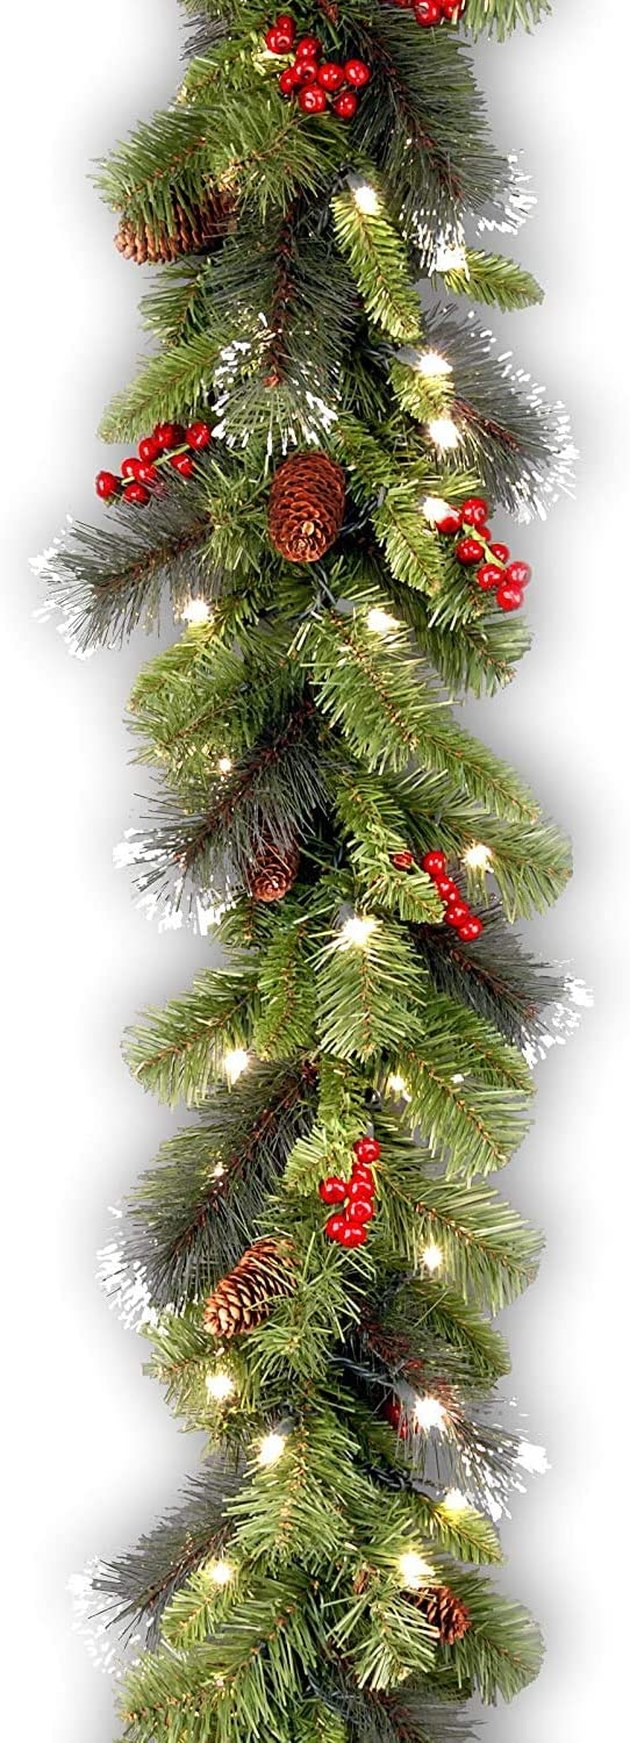 This no-frills, nine-foot Christmas garland is ready to go out of the box with festive additions like warm lights, pine cones, and berry clusters. It’s available in battery-powered and plug-in options, leaving you even more options to decorate your home, whether you want to make your front door, railings, or mantles pop for the holidays.